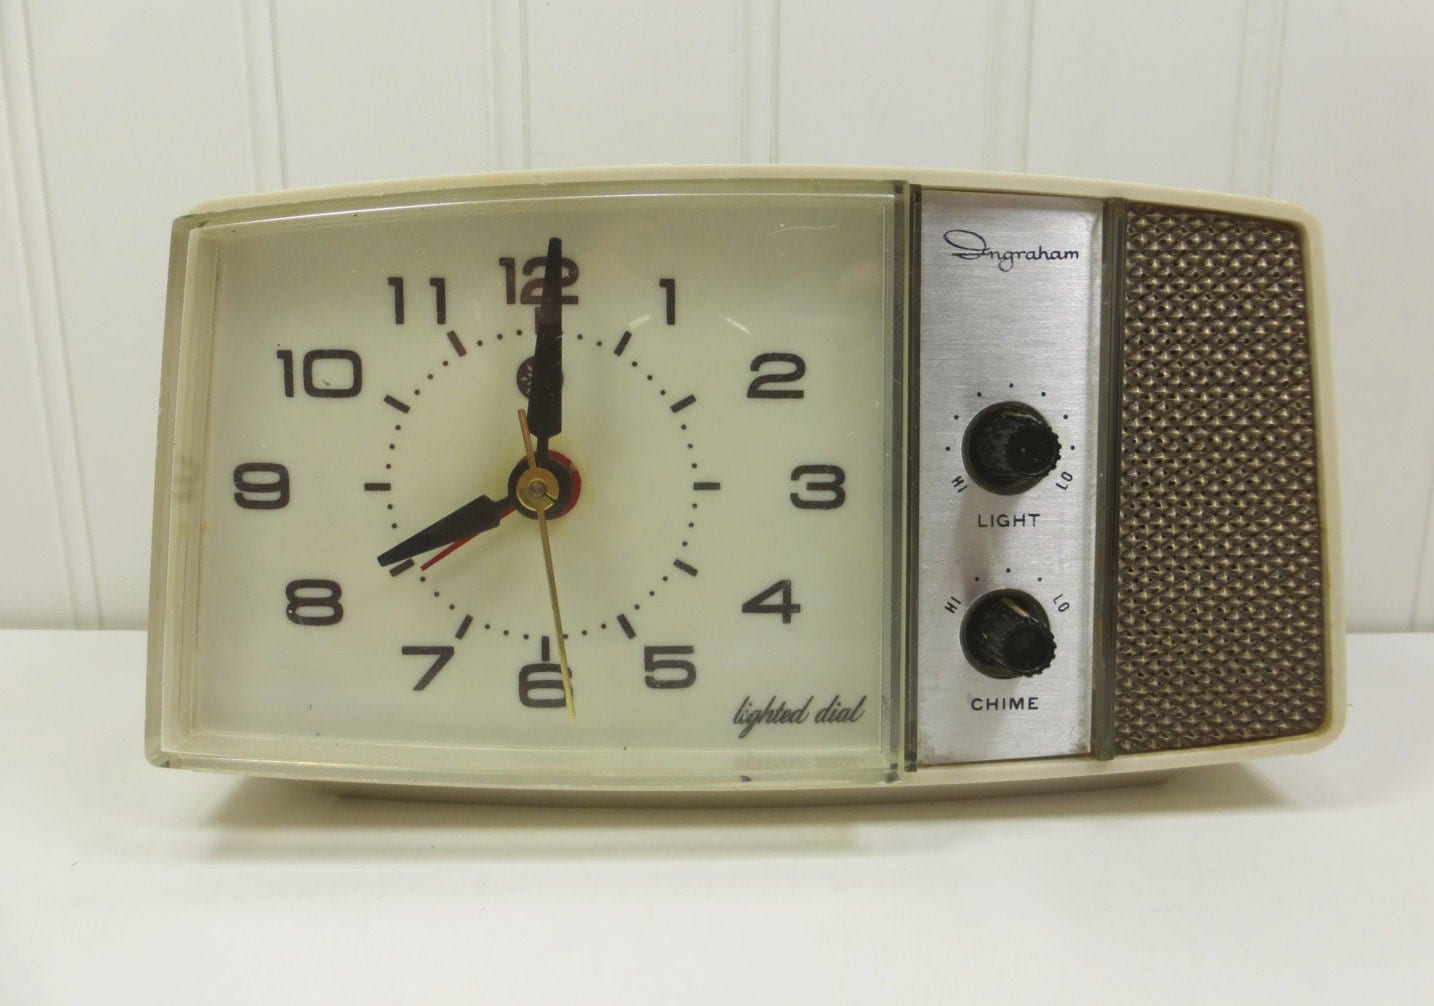 Vintage Ingraham Electric Alarm Clock with Lighted Dial